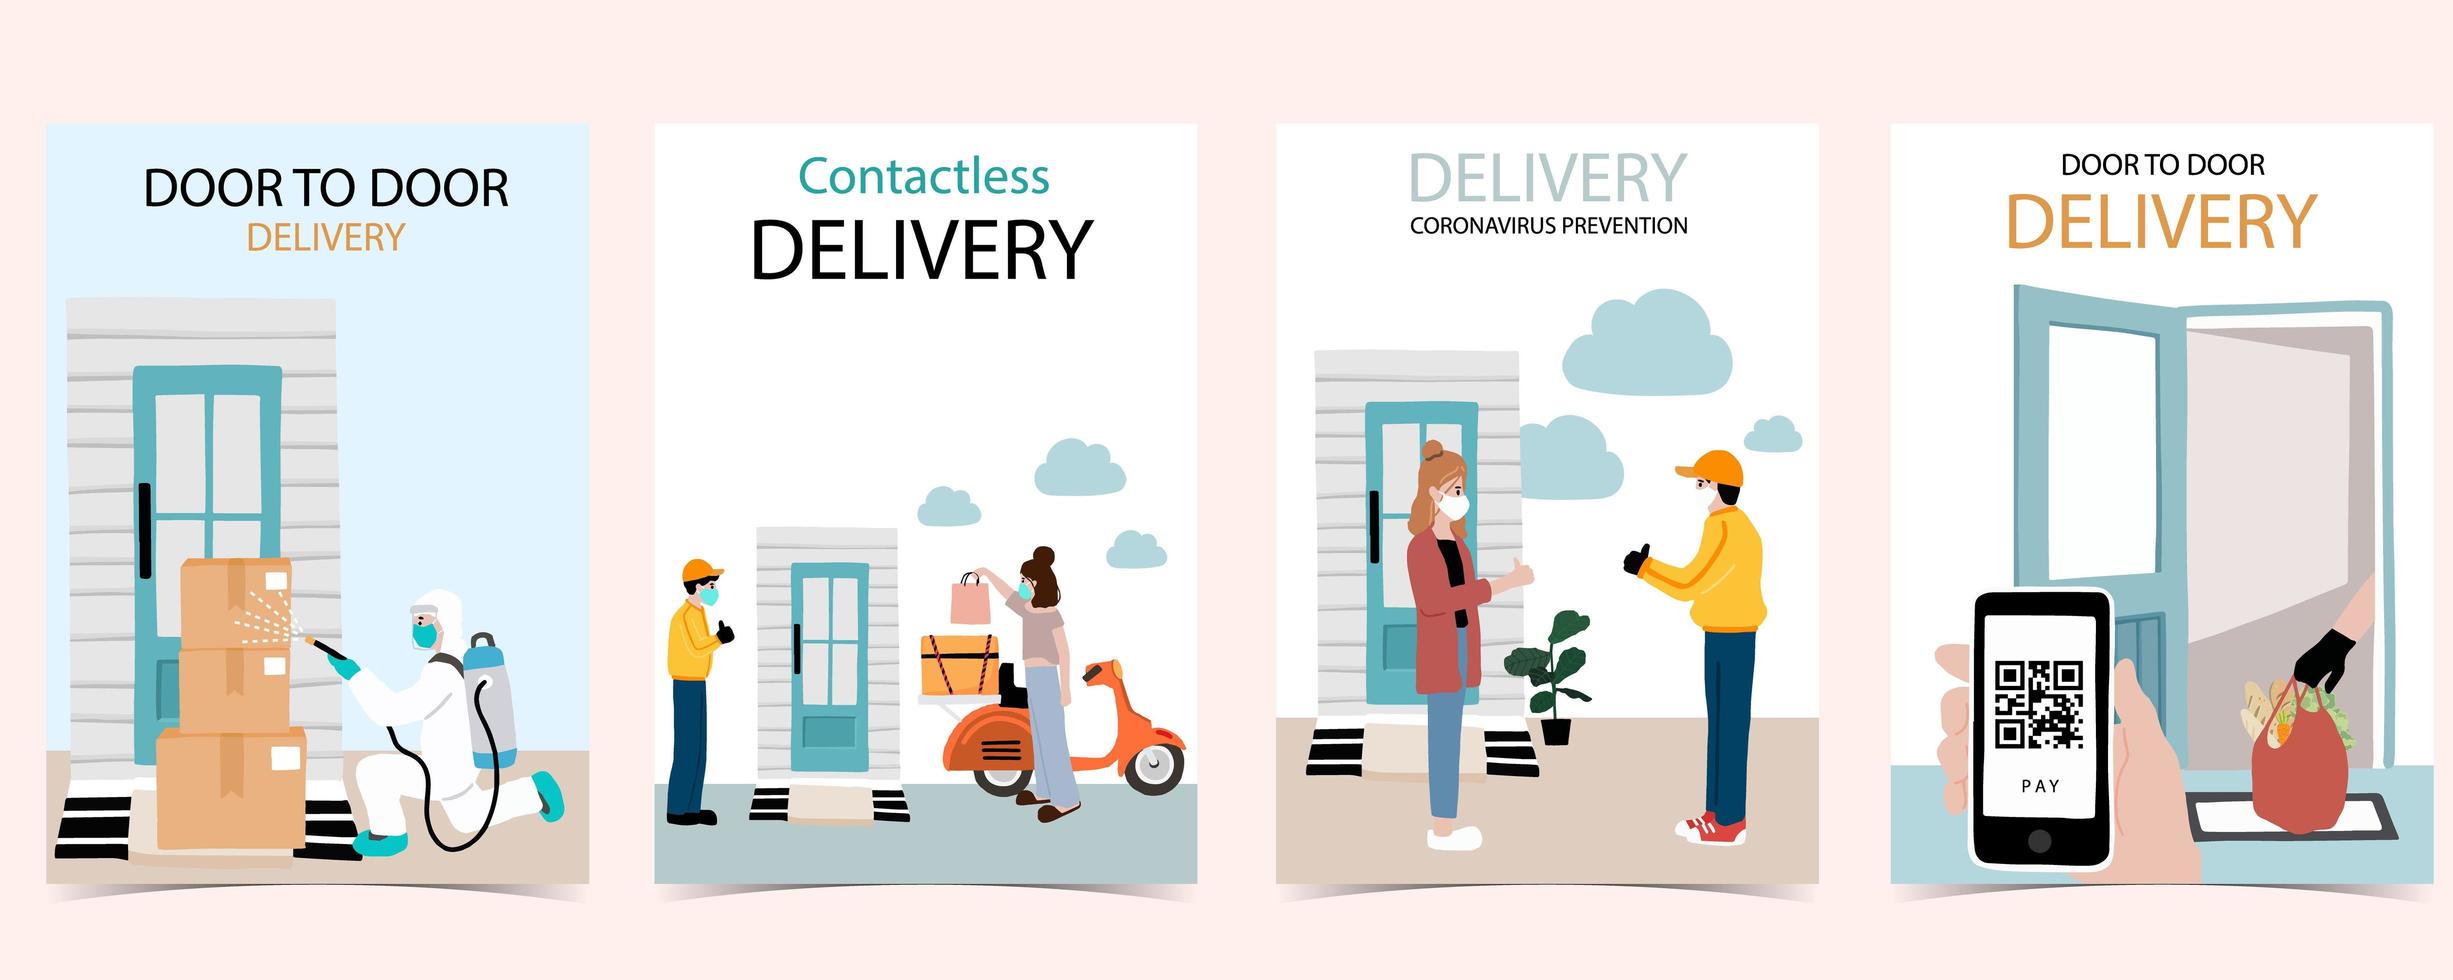 Online delivery during Coronavirus poster set vector